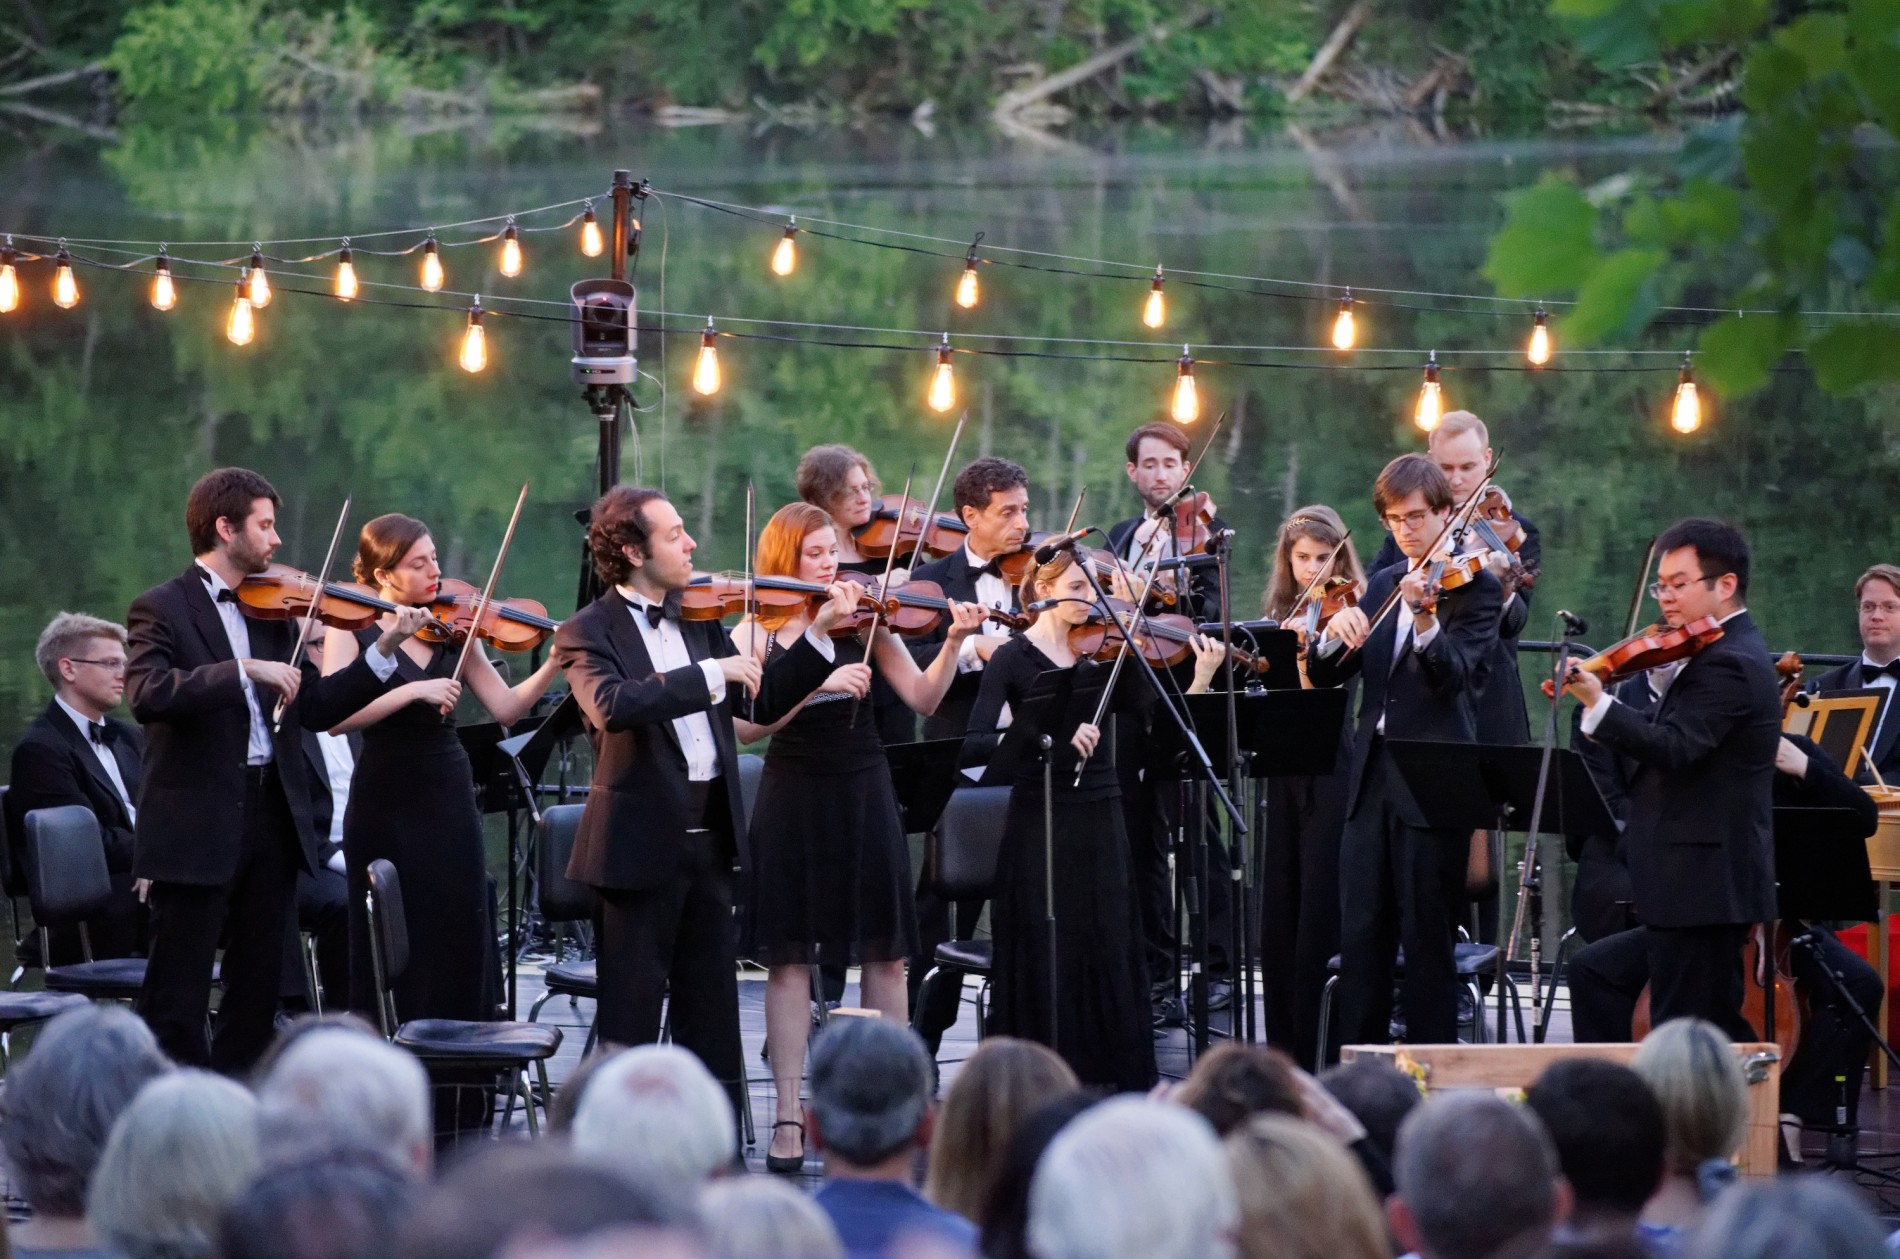 Musicians wearing concert black, standing, playing Baroque instruments in an outdoor setting.